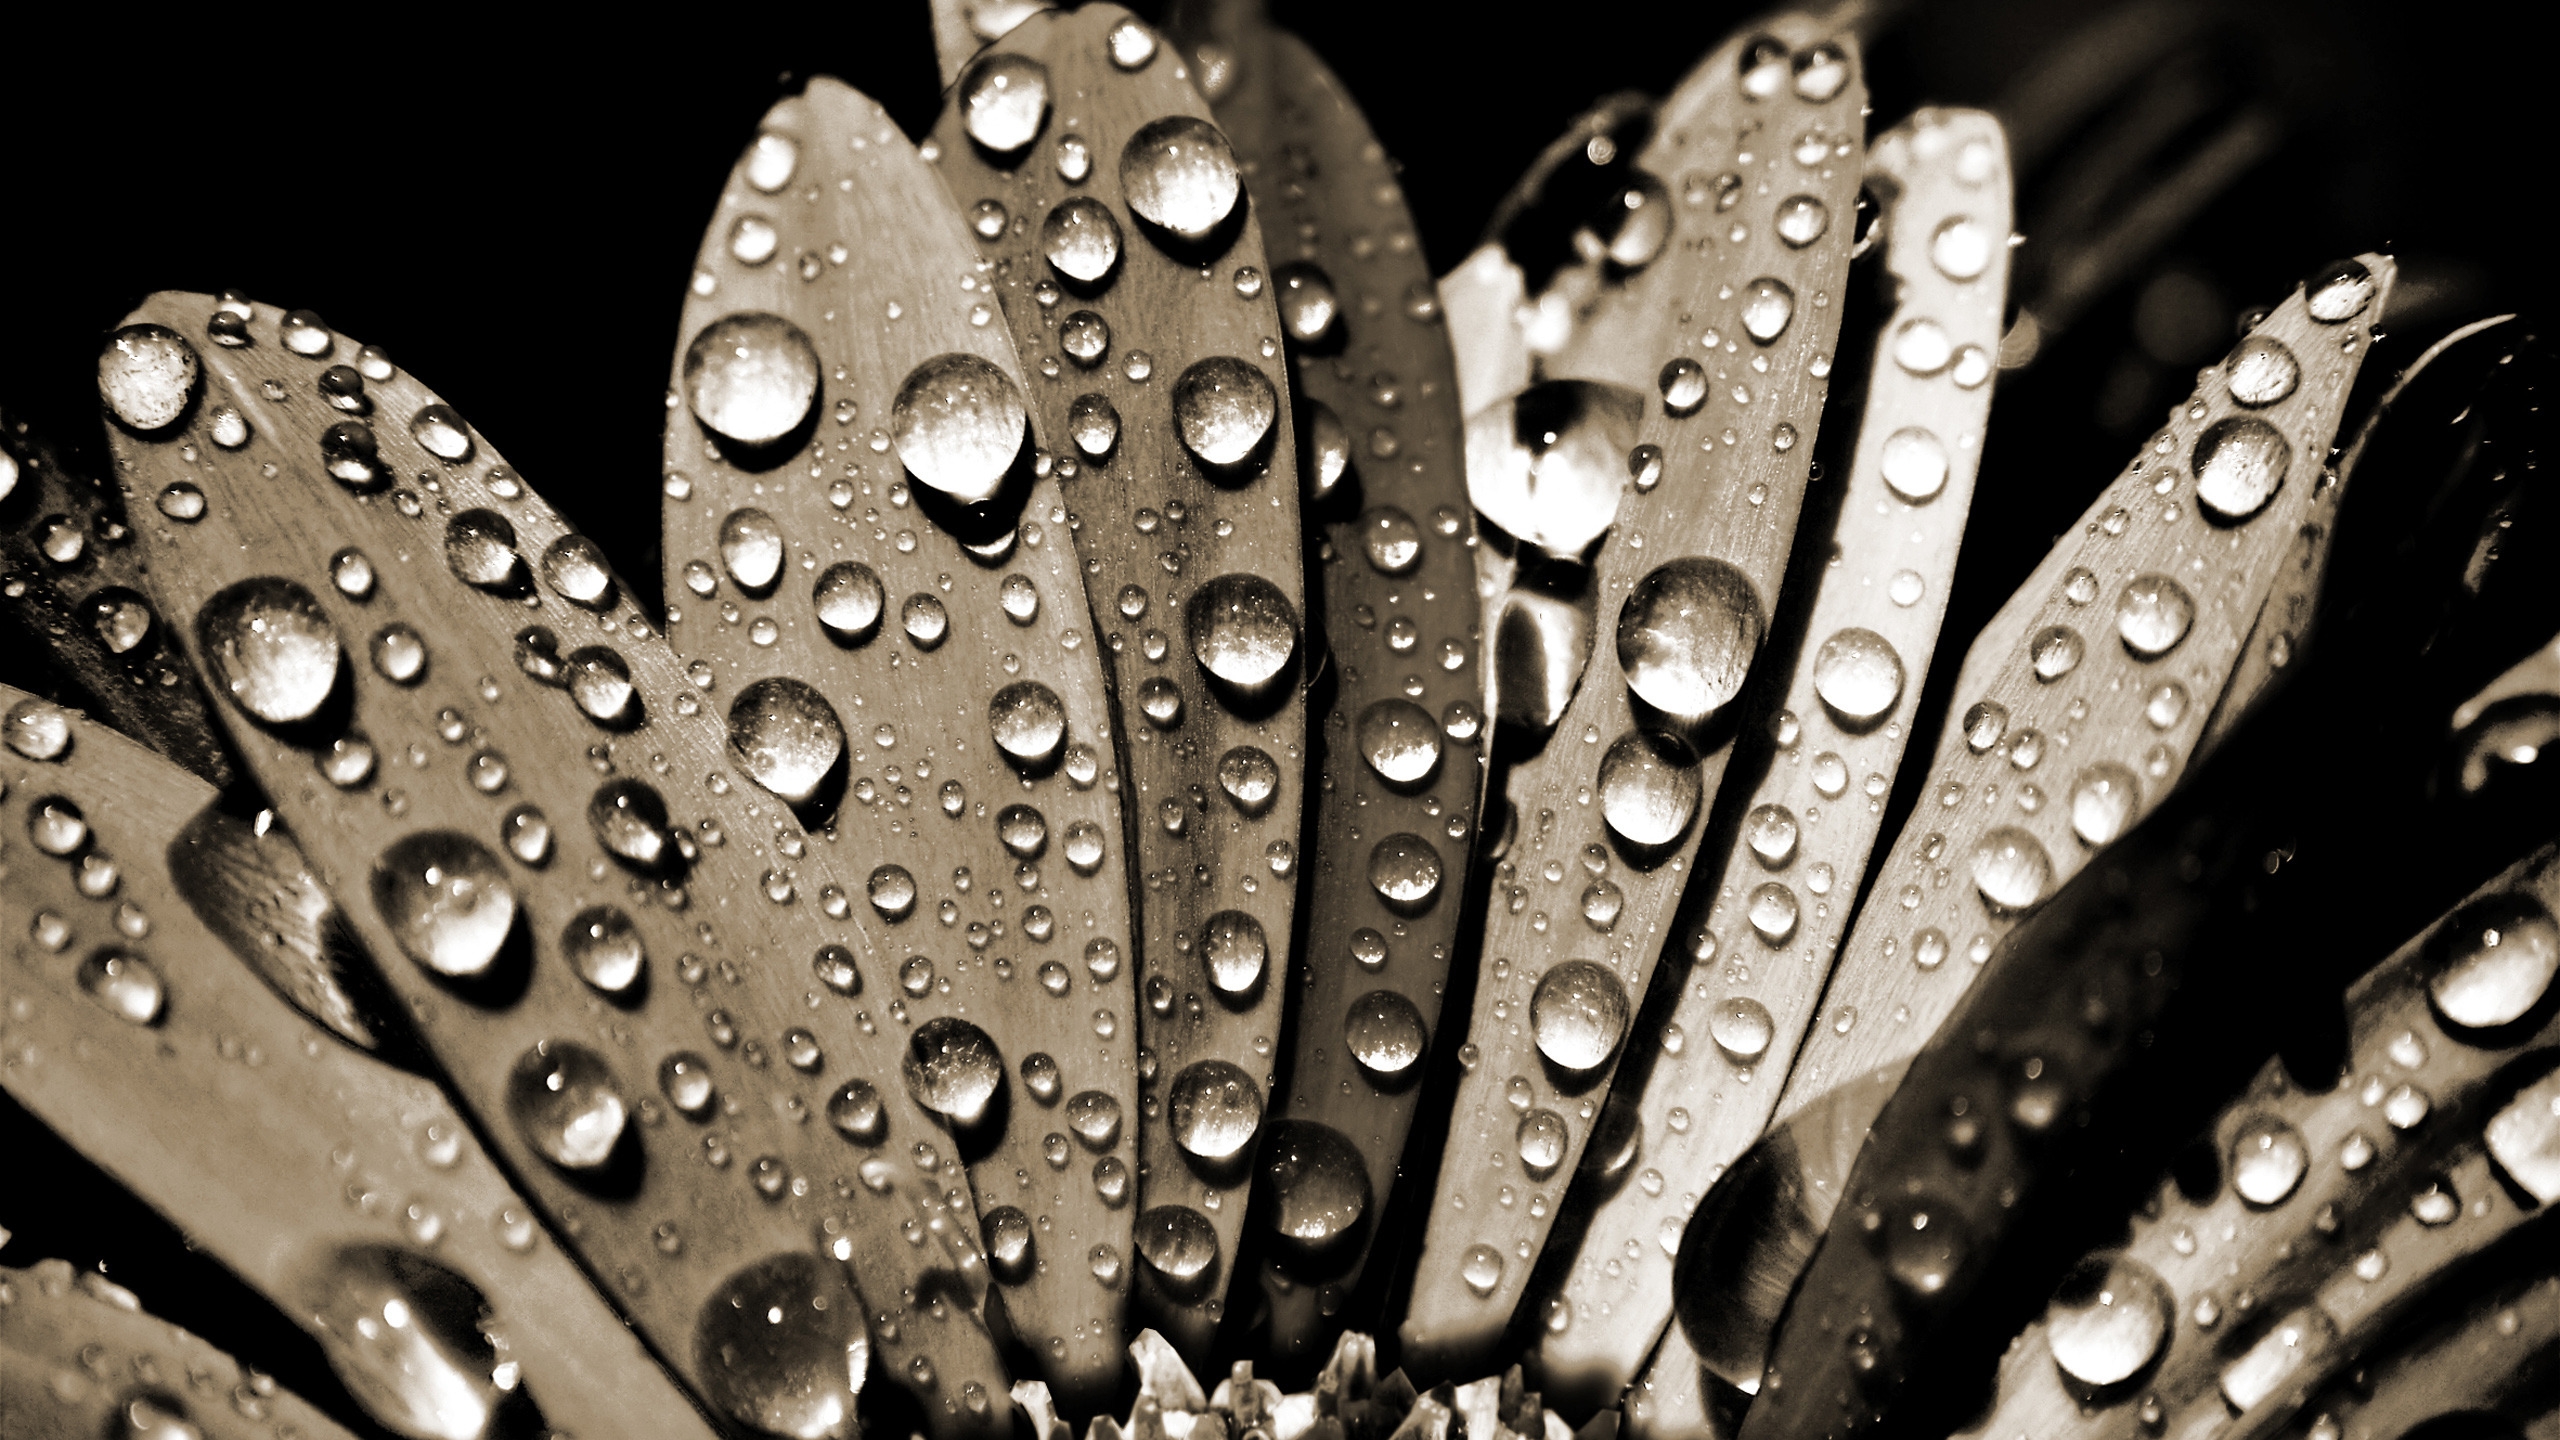 Sepia Water Drops for 2560x1440 HDTV resolution